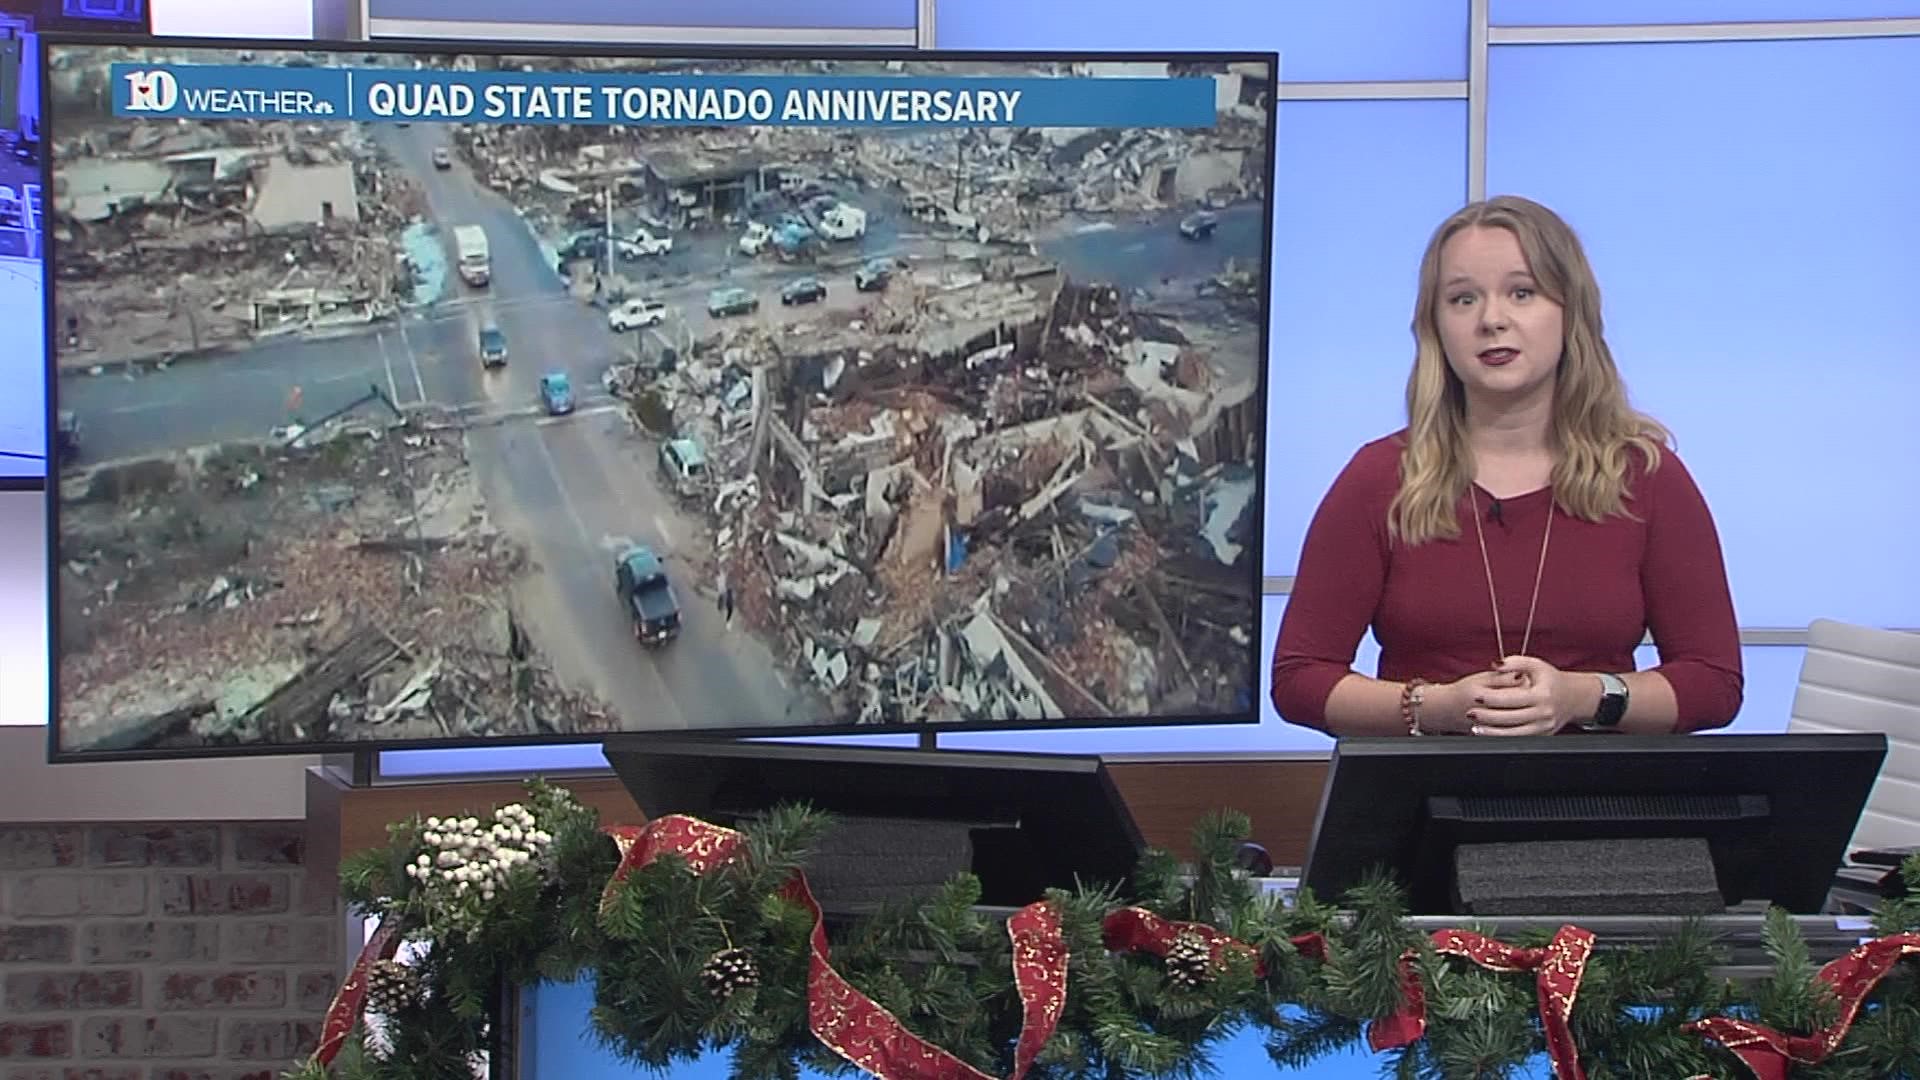 It's been one year since the Quad State tornado.